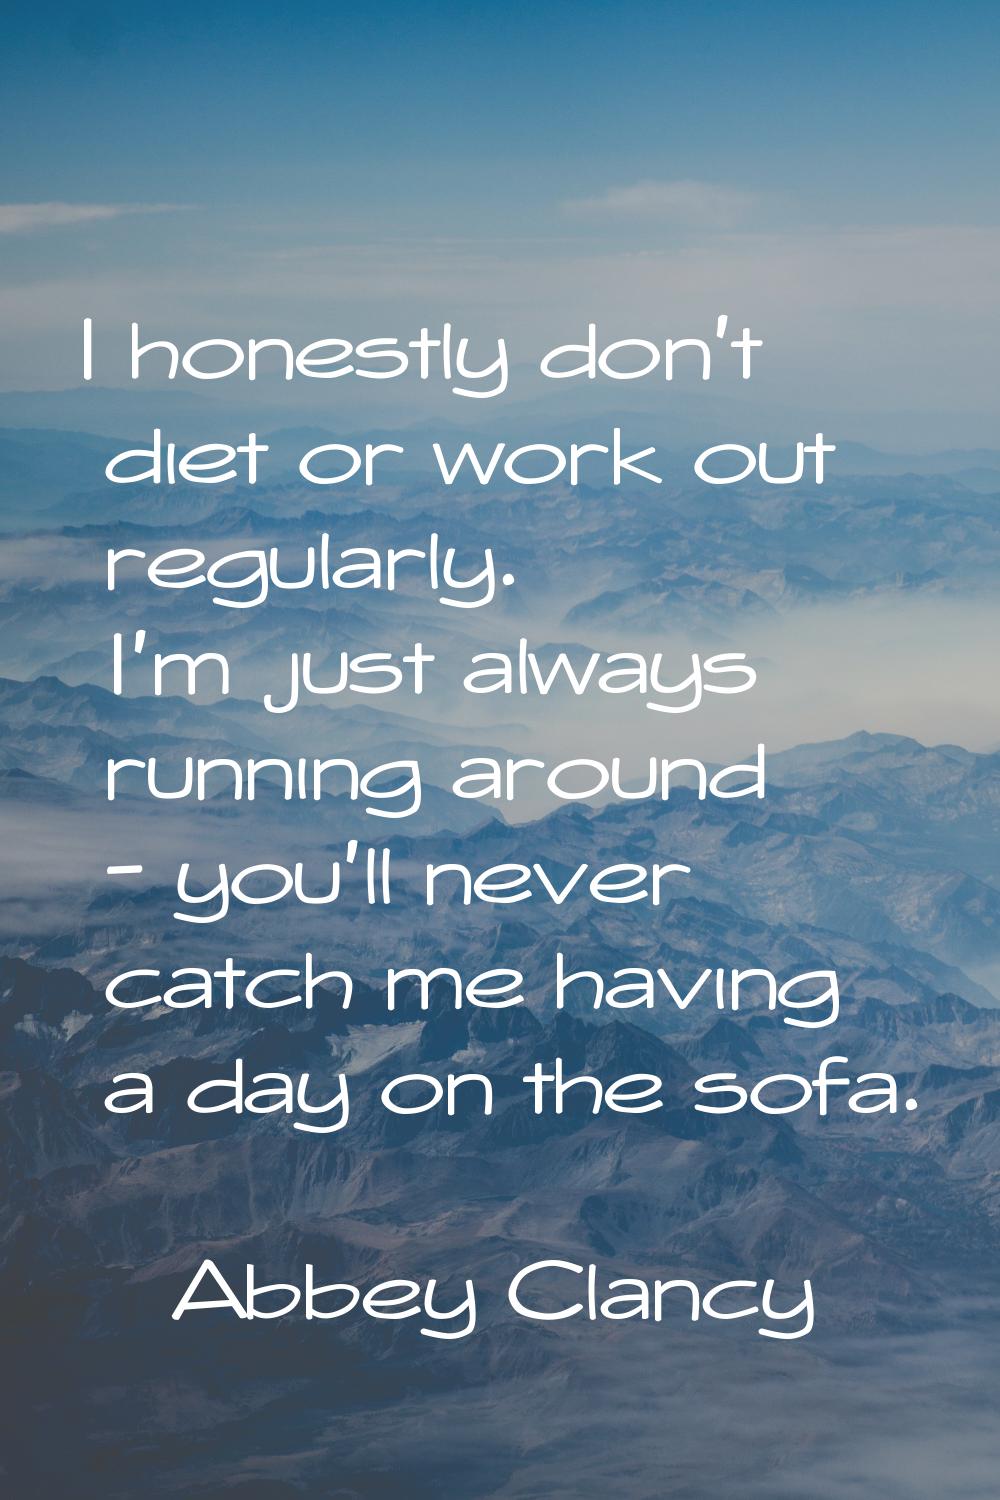 I honestly don't diet or work out regularly. I'm just always running around - you'll never catch me